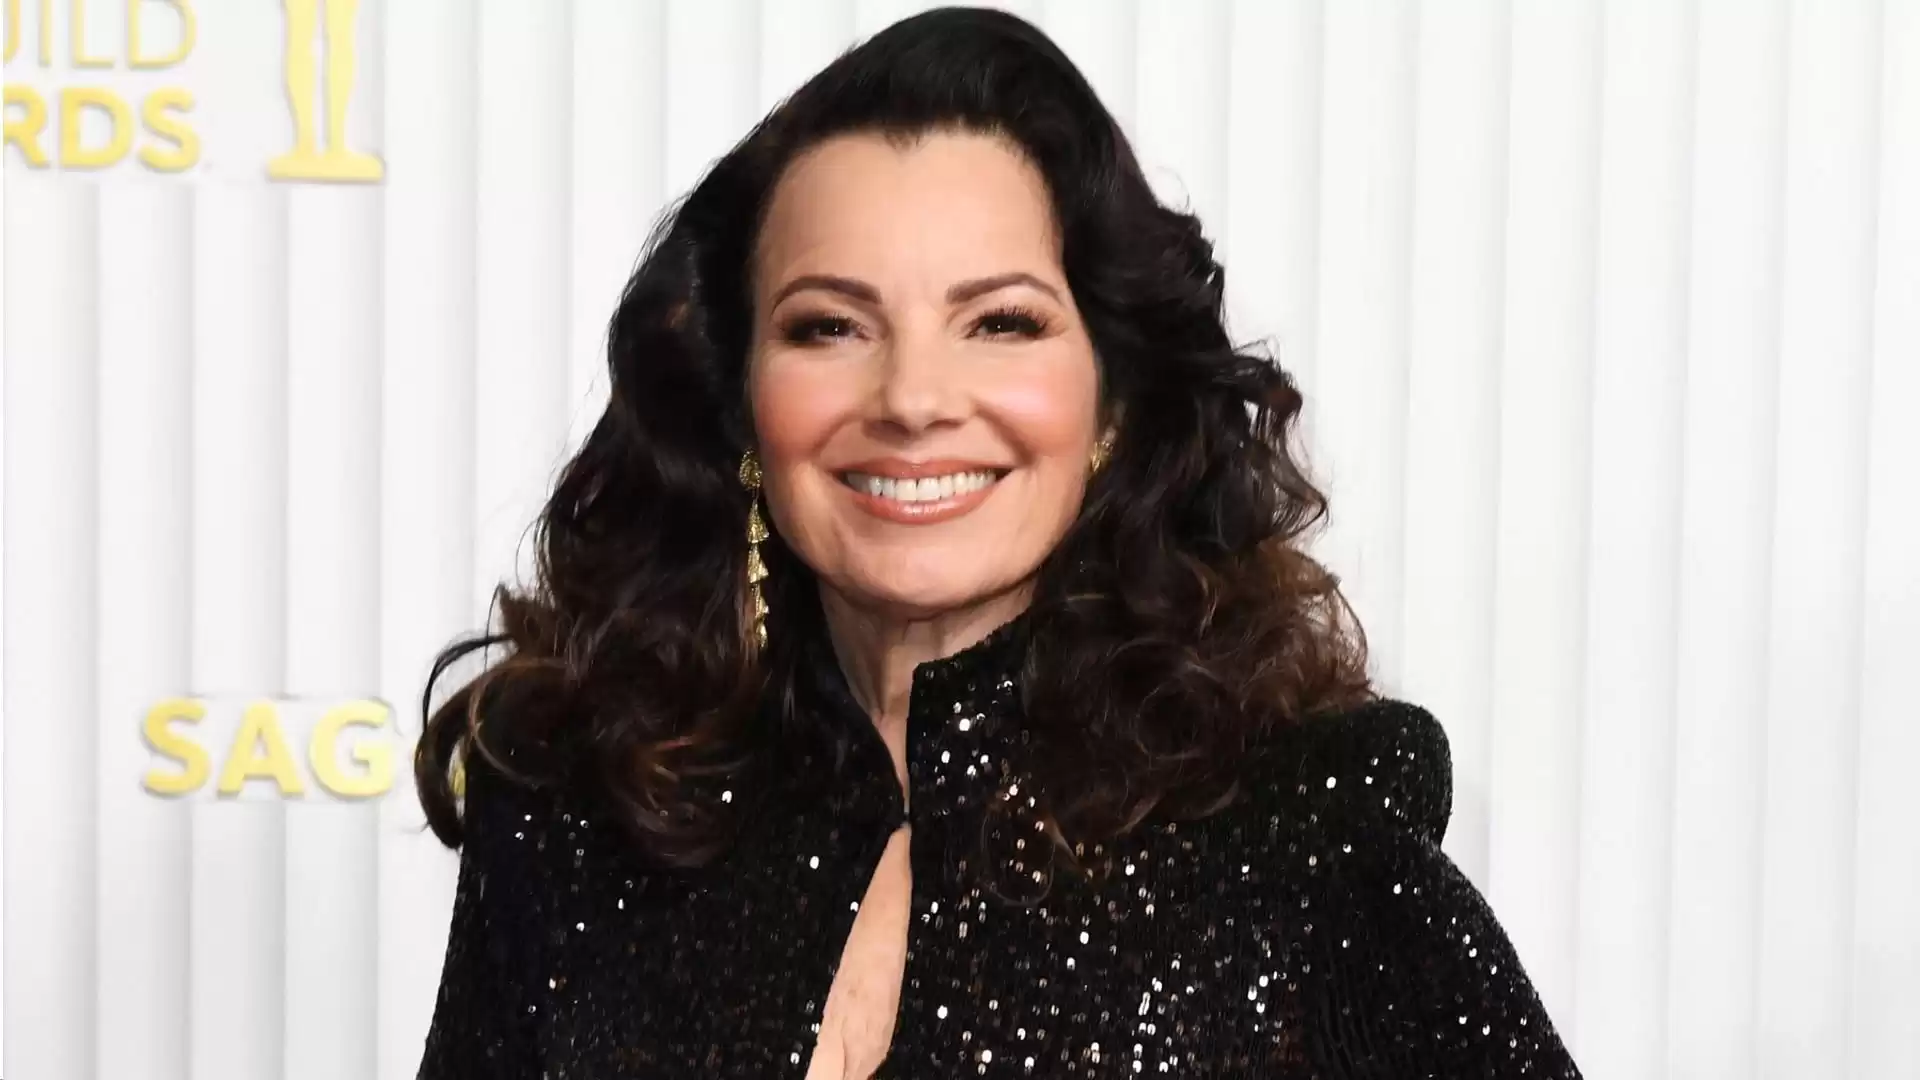 Controversy arises as Fran Drescher's anti-vaccine stance surfaces during a passionate SAG AFTRA speech